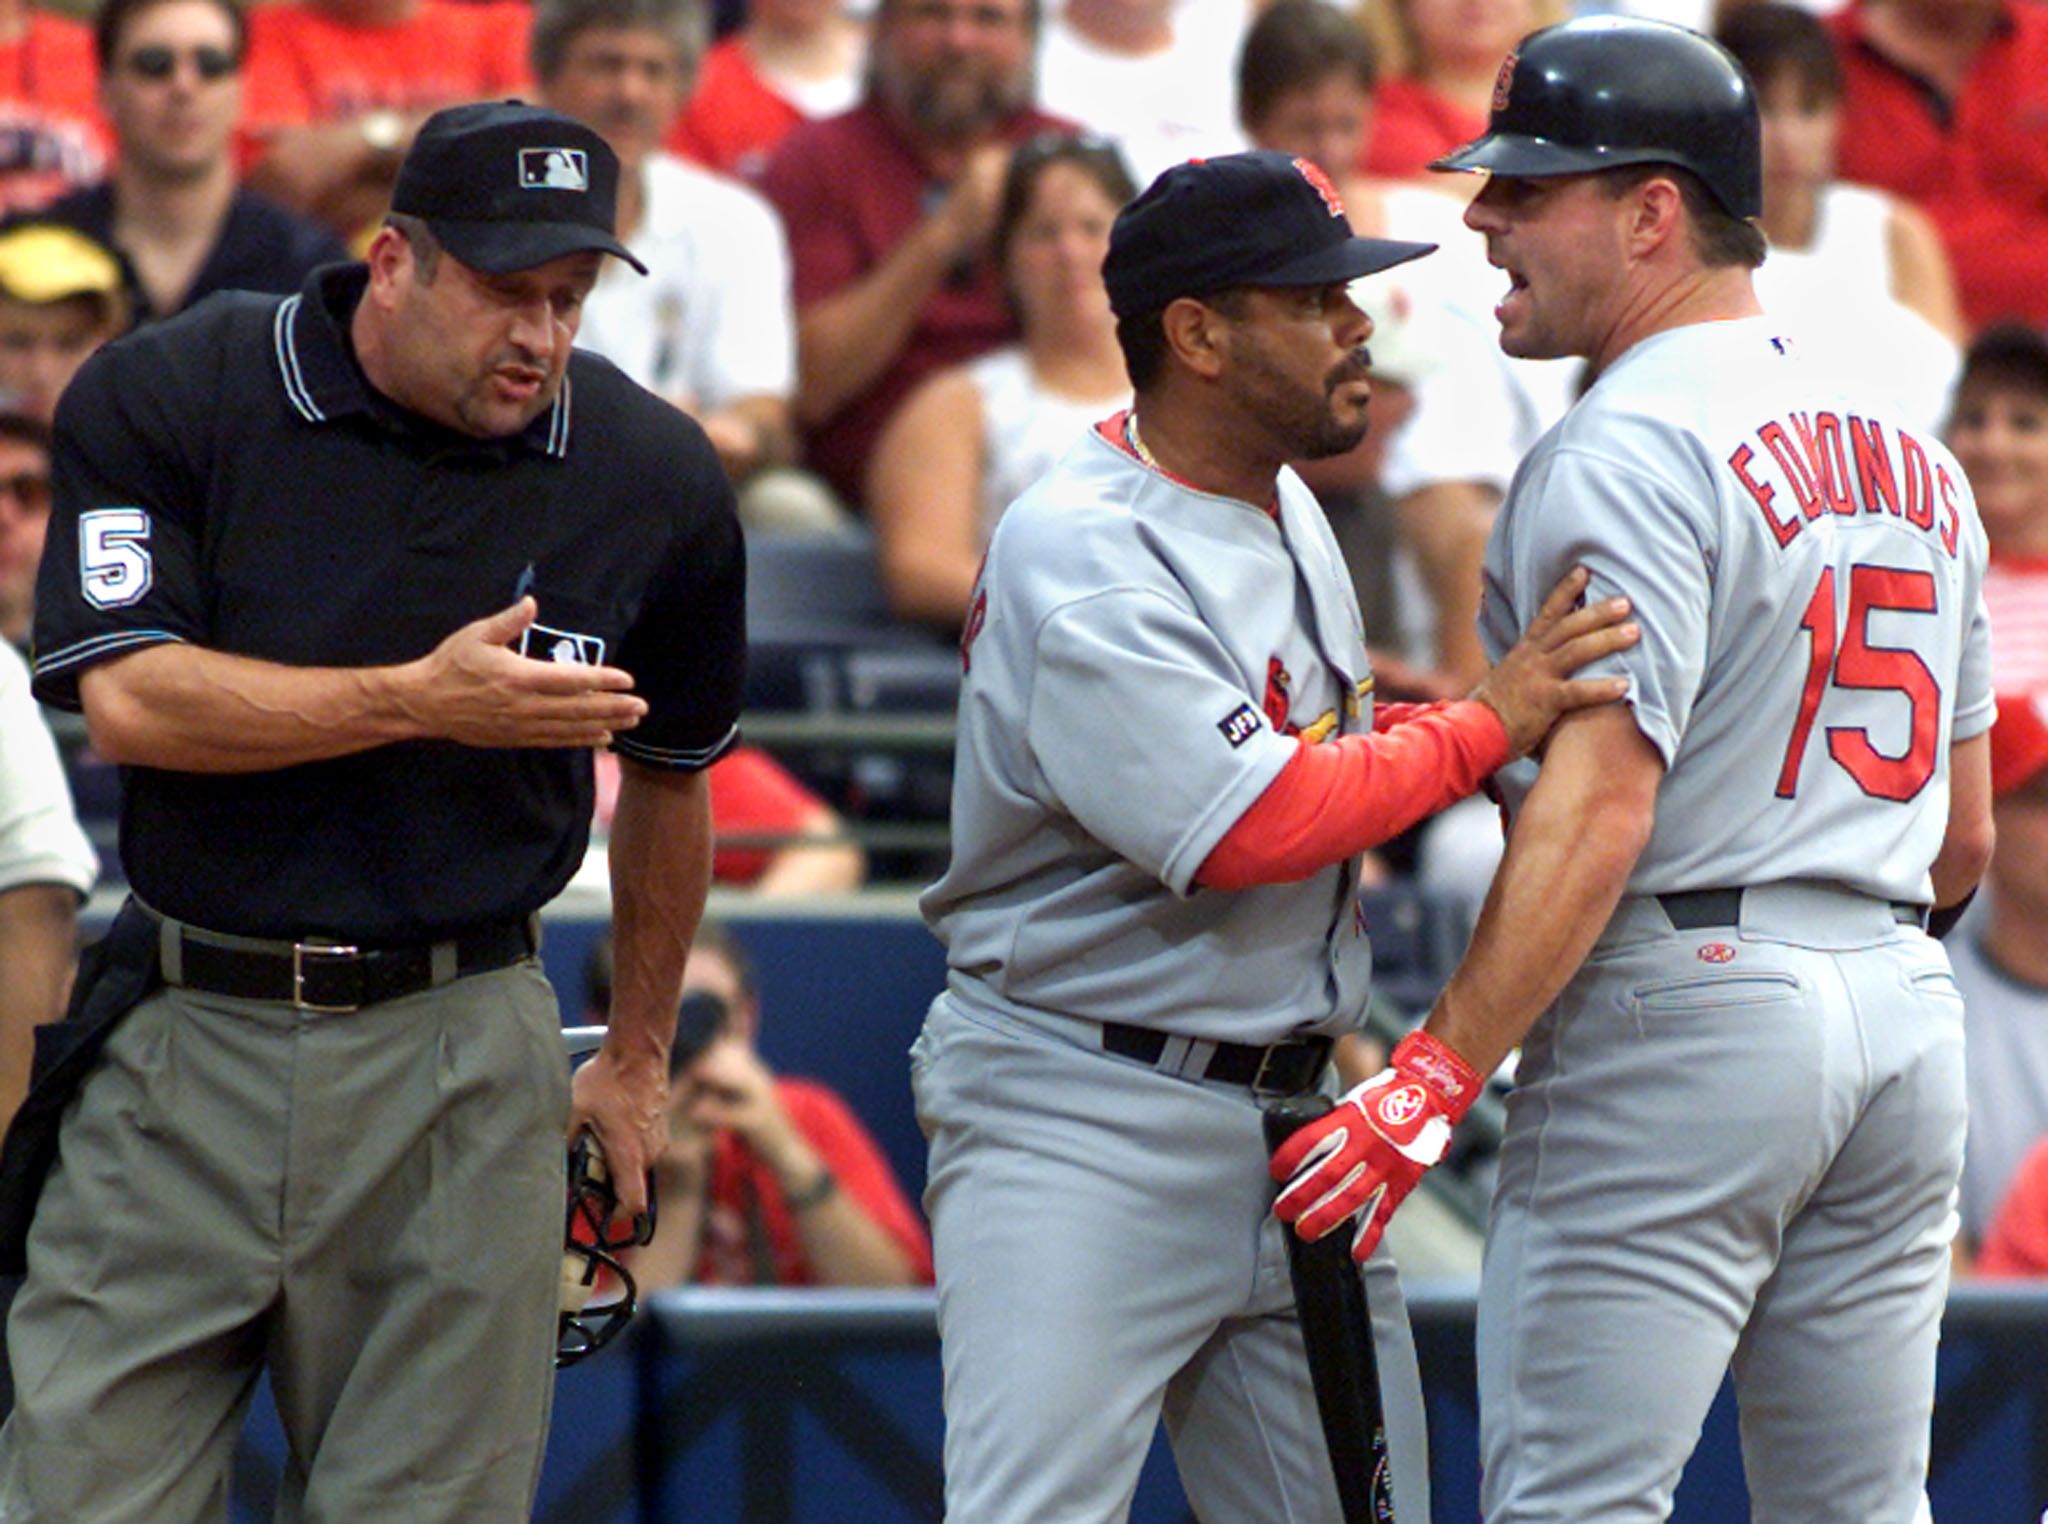 Dale Scott Comes Out Mlb Baseball Umpire Becomes First Official In A Major Sport To Announce He 3433